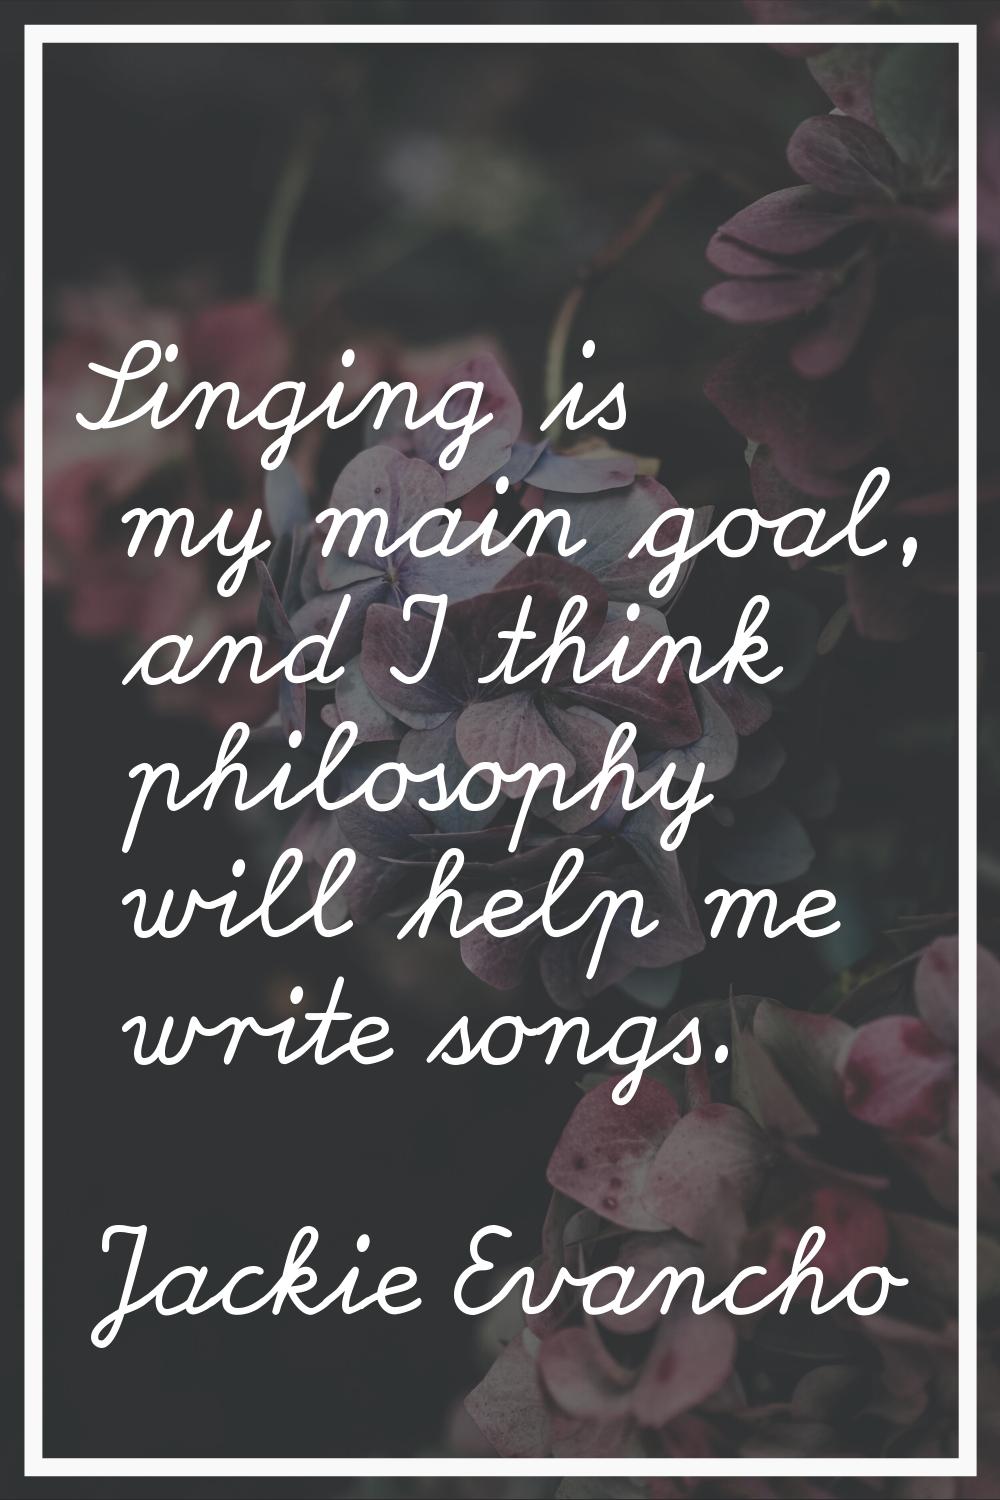 Singing is my main goal, and I think philosophy will help me write songs.